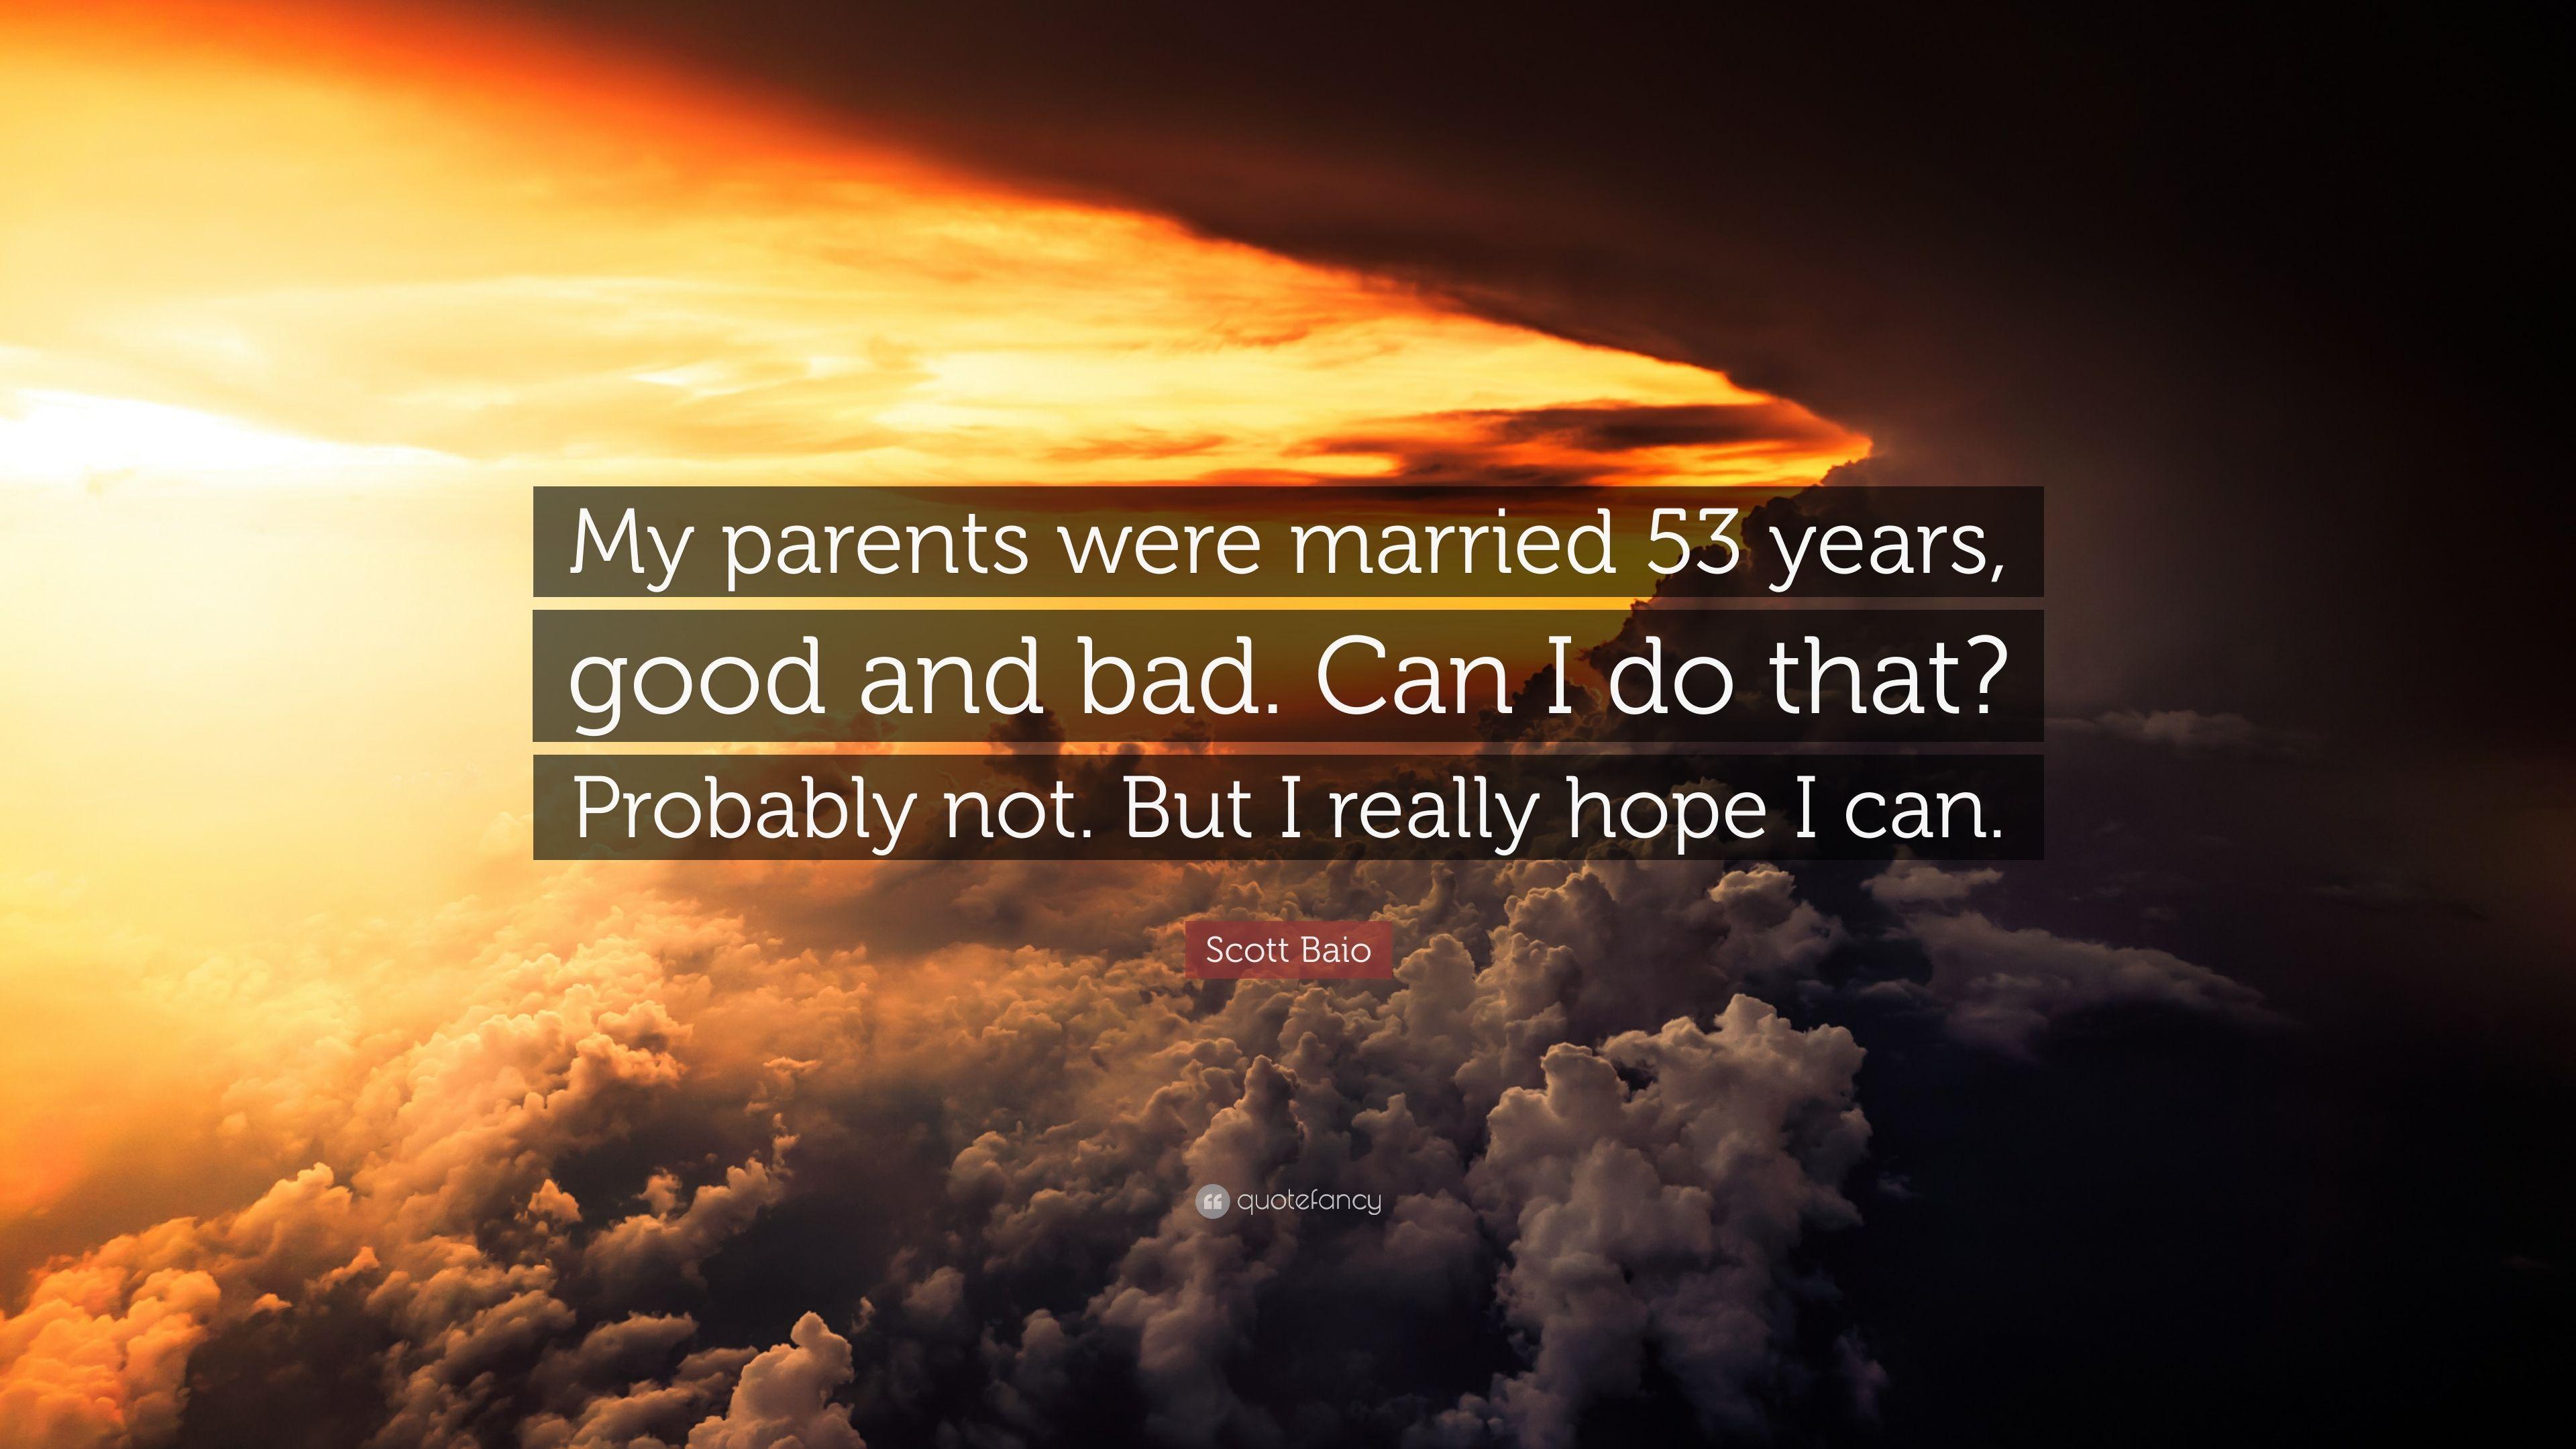 Scott Baio Quote: “My parents were married 53 years, good and bad